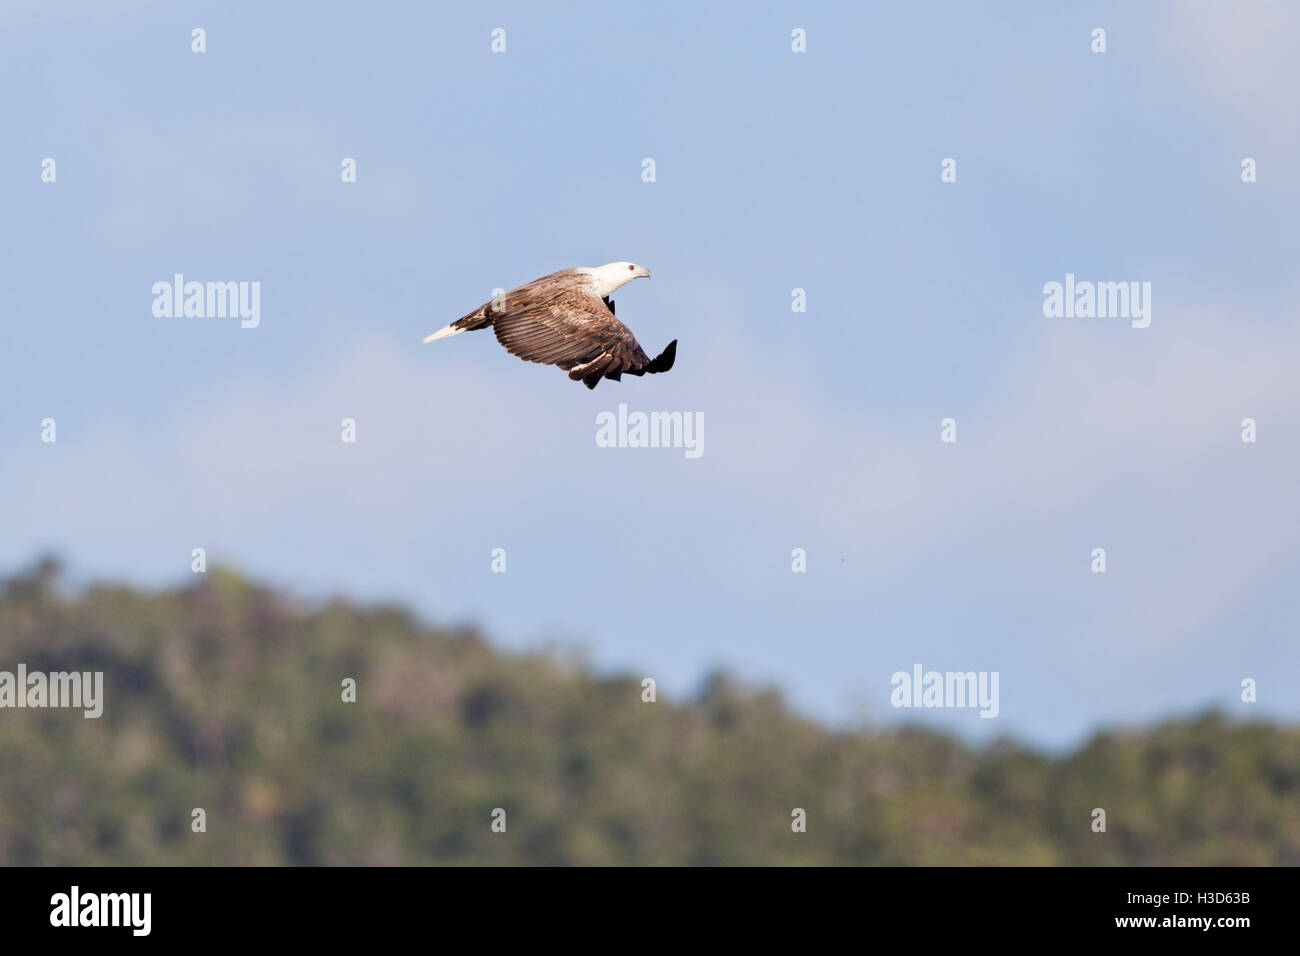 Adult White-bellied Sea Eagle flying over tropical mangrove forest on the island of Langkawi, Malaysia Stock Photo